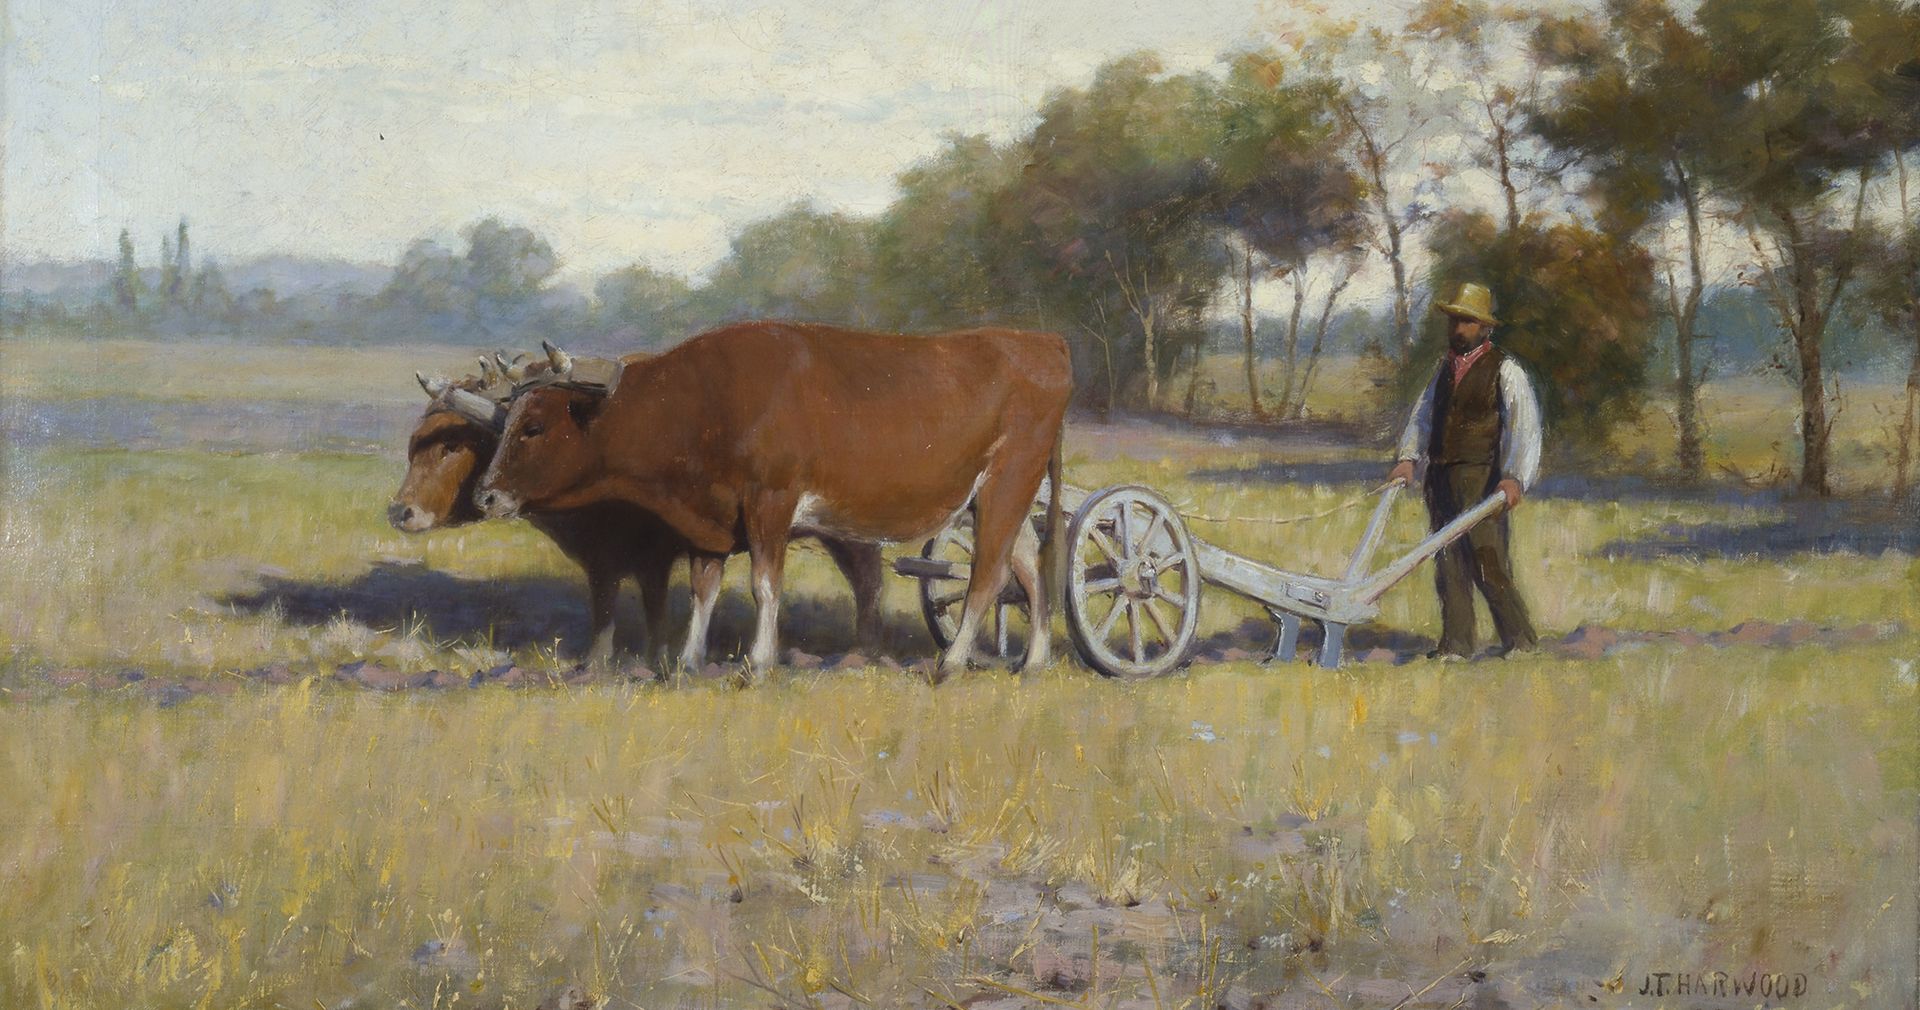 Painting depicts oxen pulling plow, by J.T. Harwood.